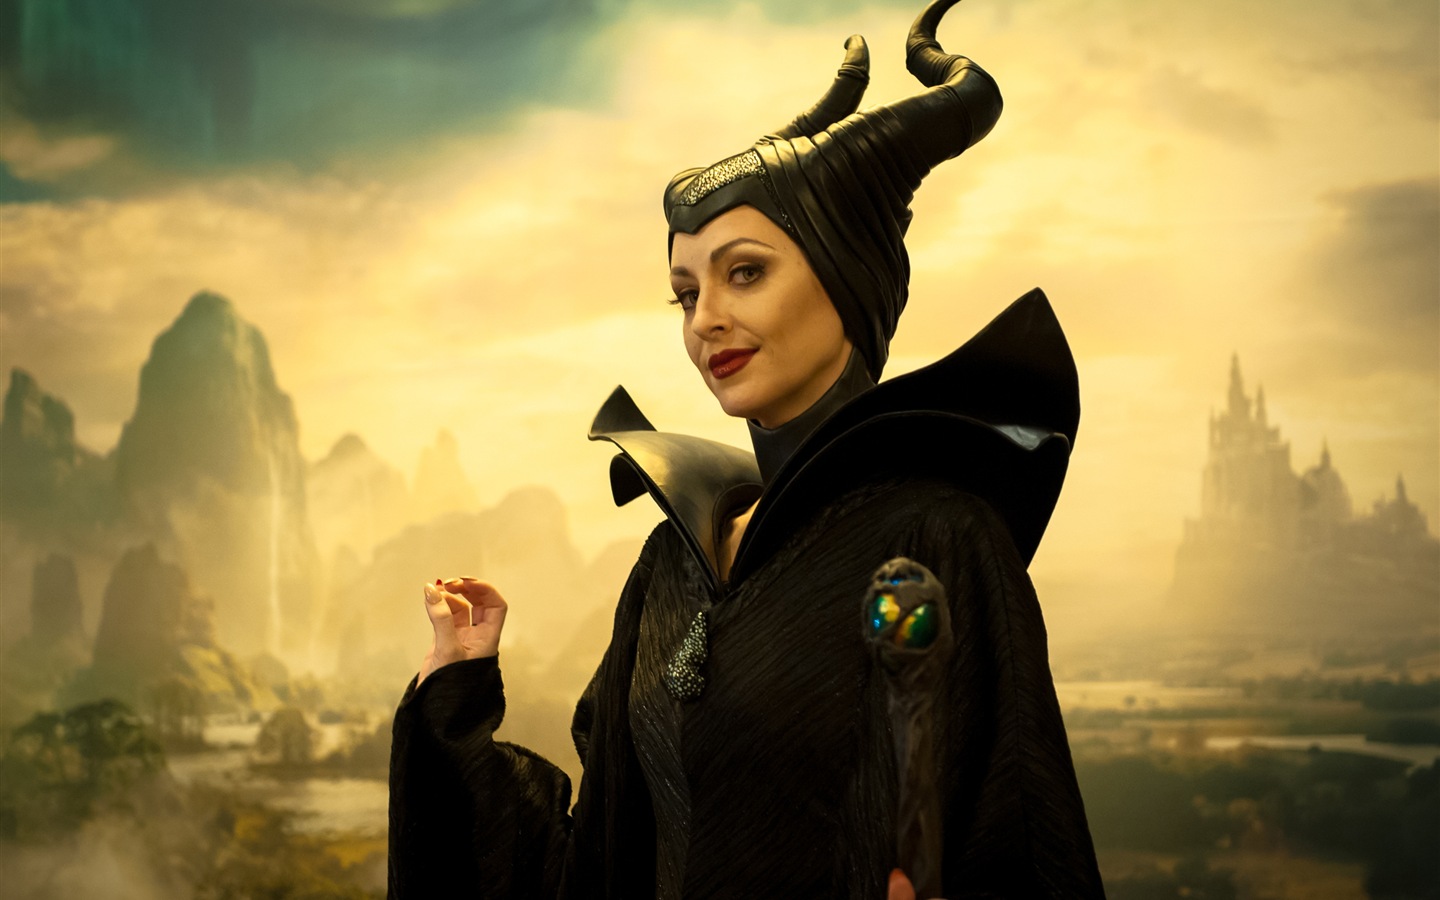 Maleficent 2014 HD movie wallpapers #11 - 1440x900